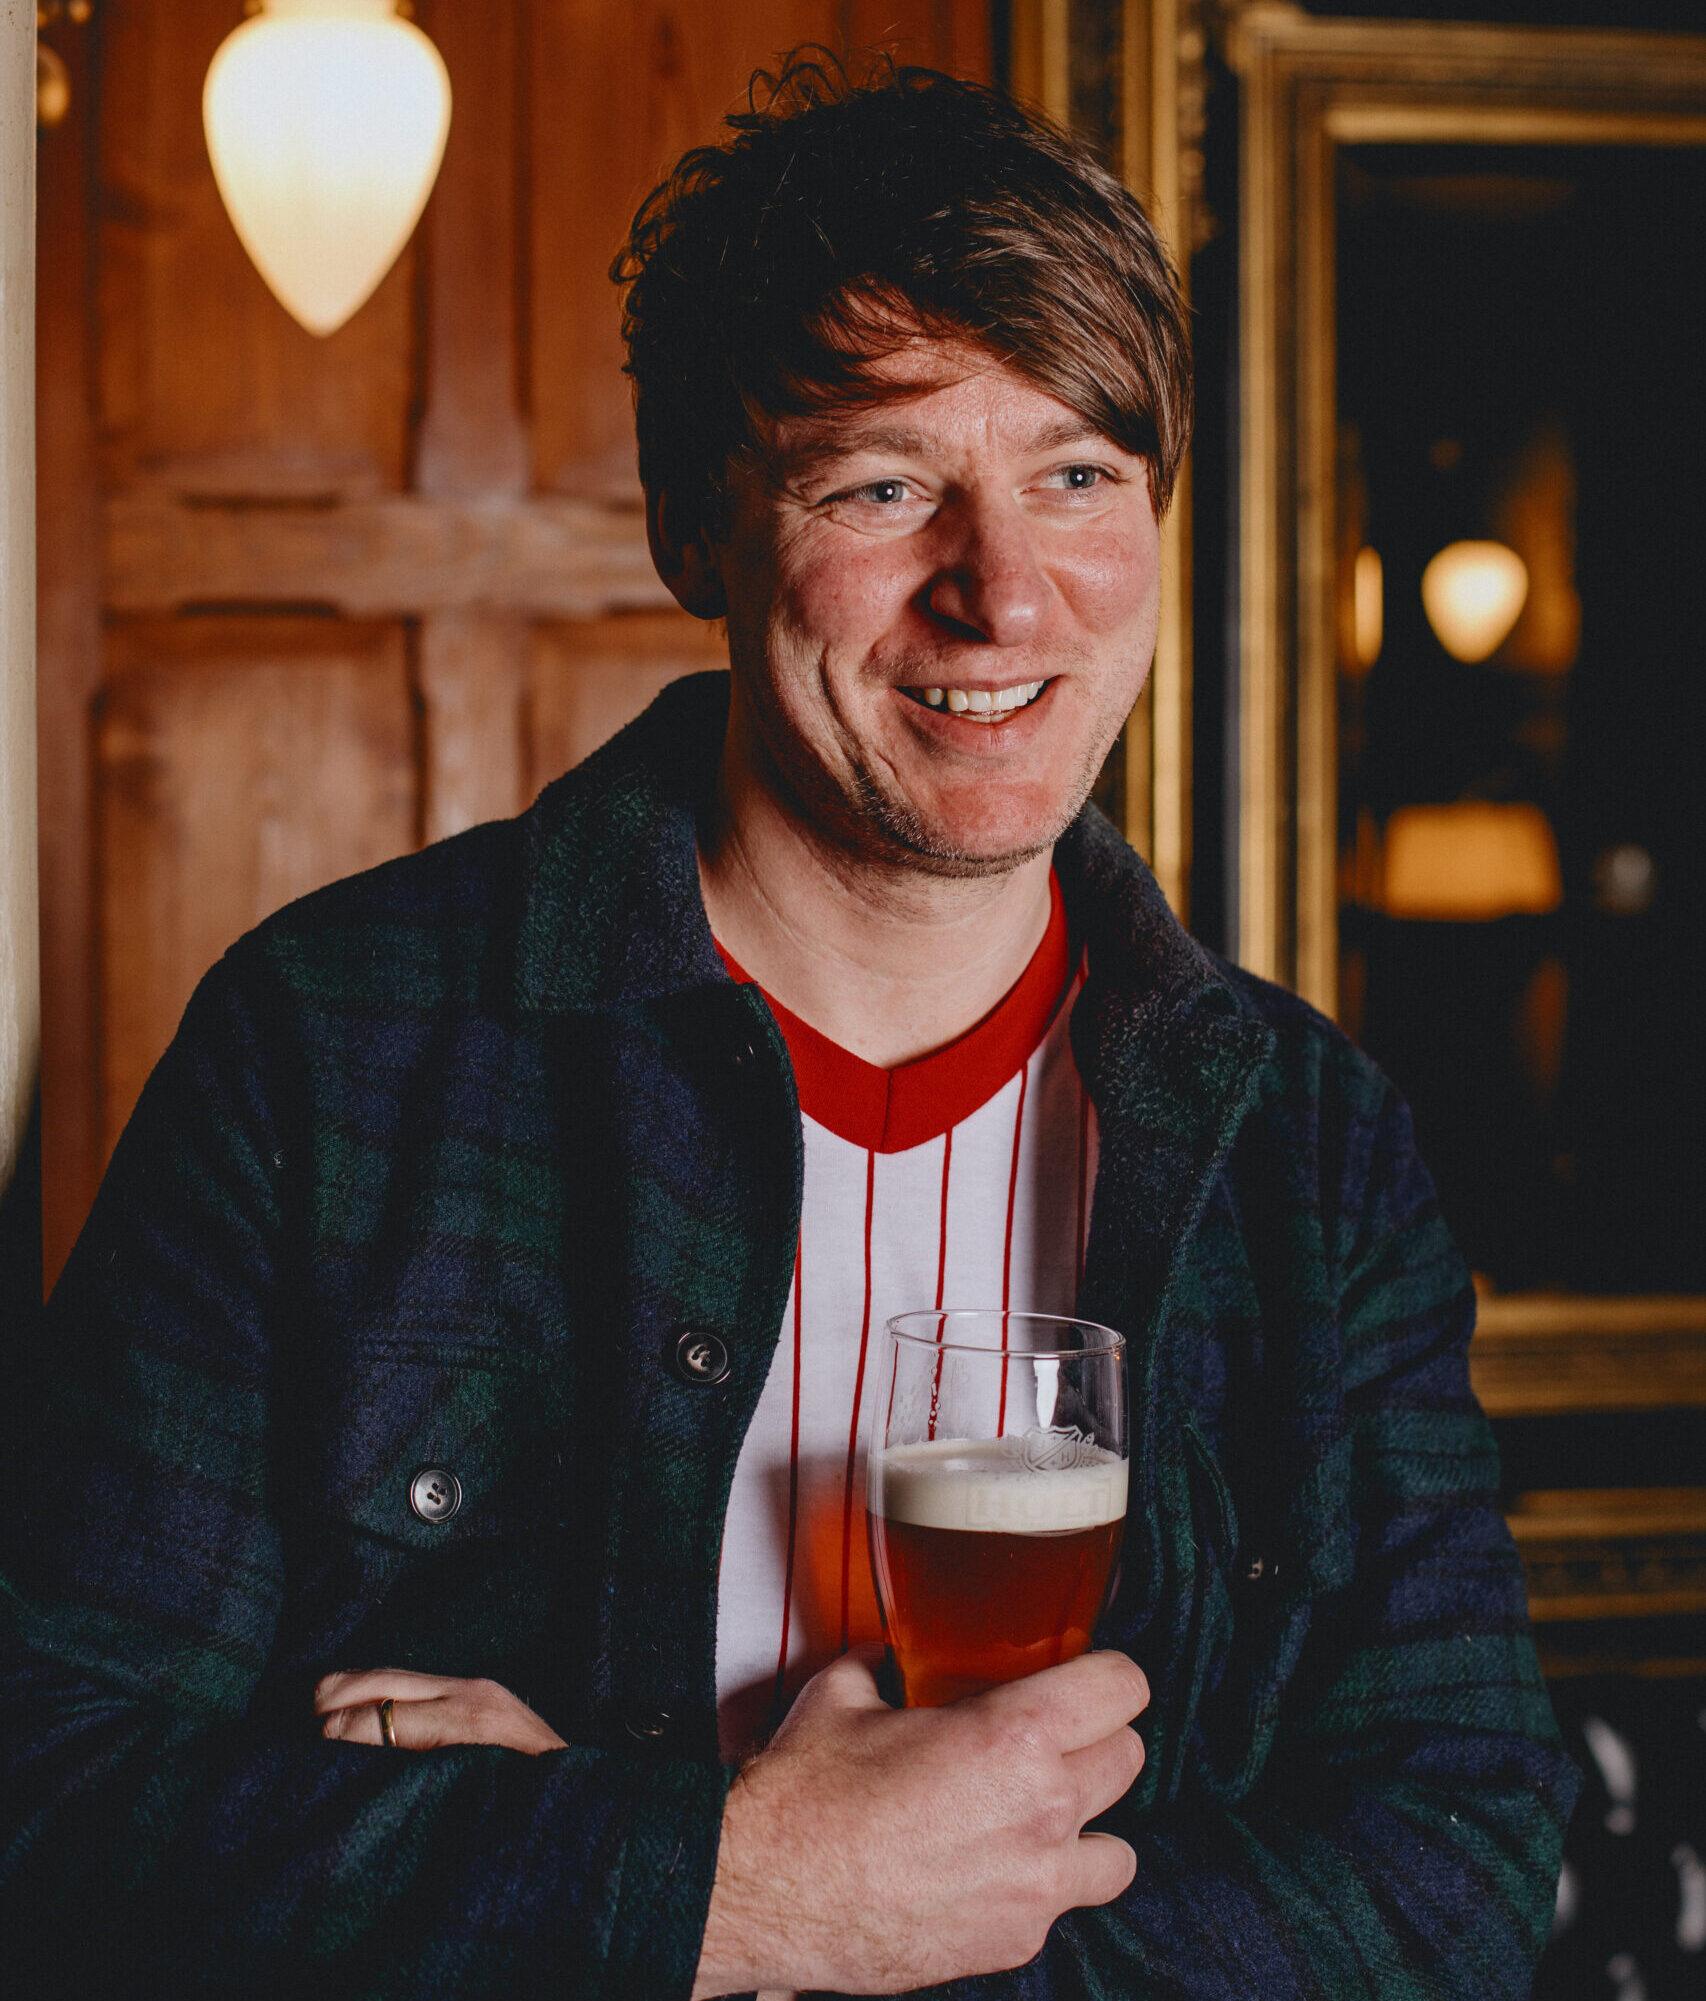 A man smiling holding a pint.